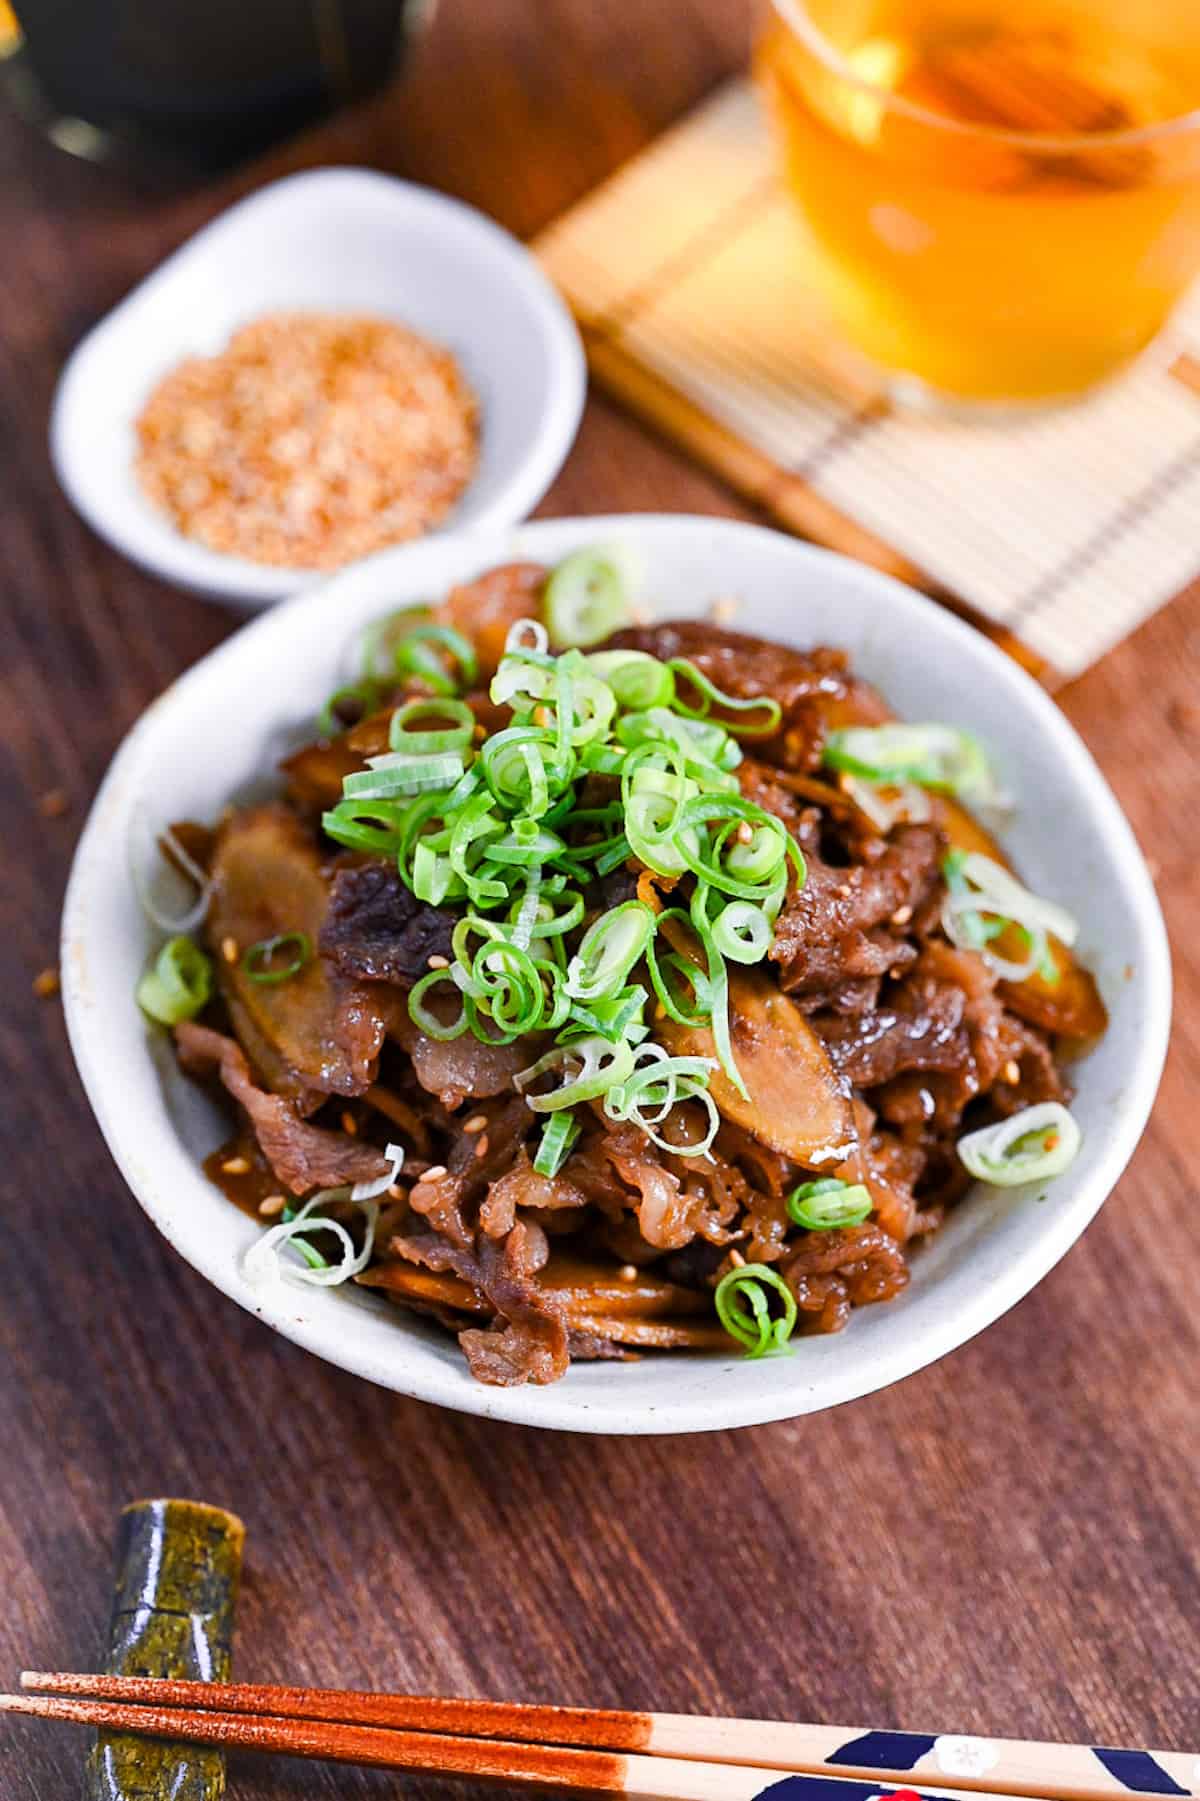 Beef shigureni with ginger and burdock root in a white dish topped with chopped green onion